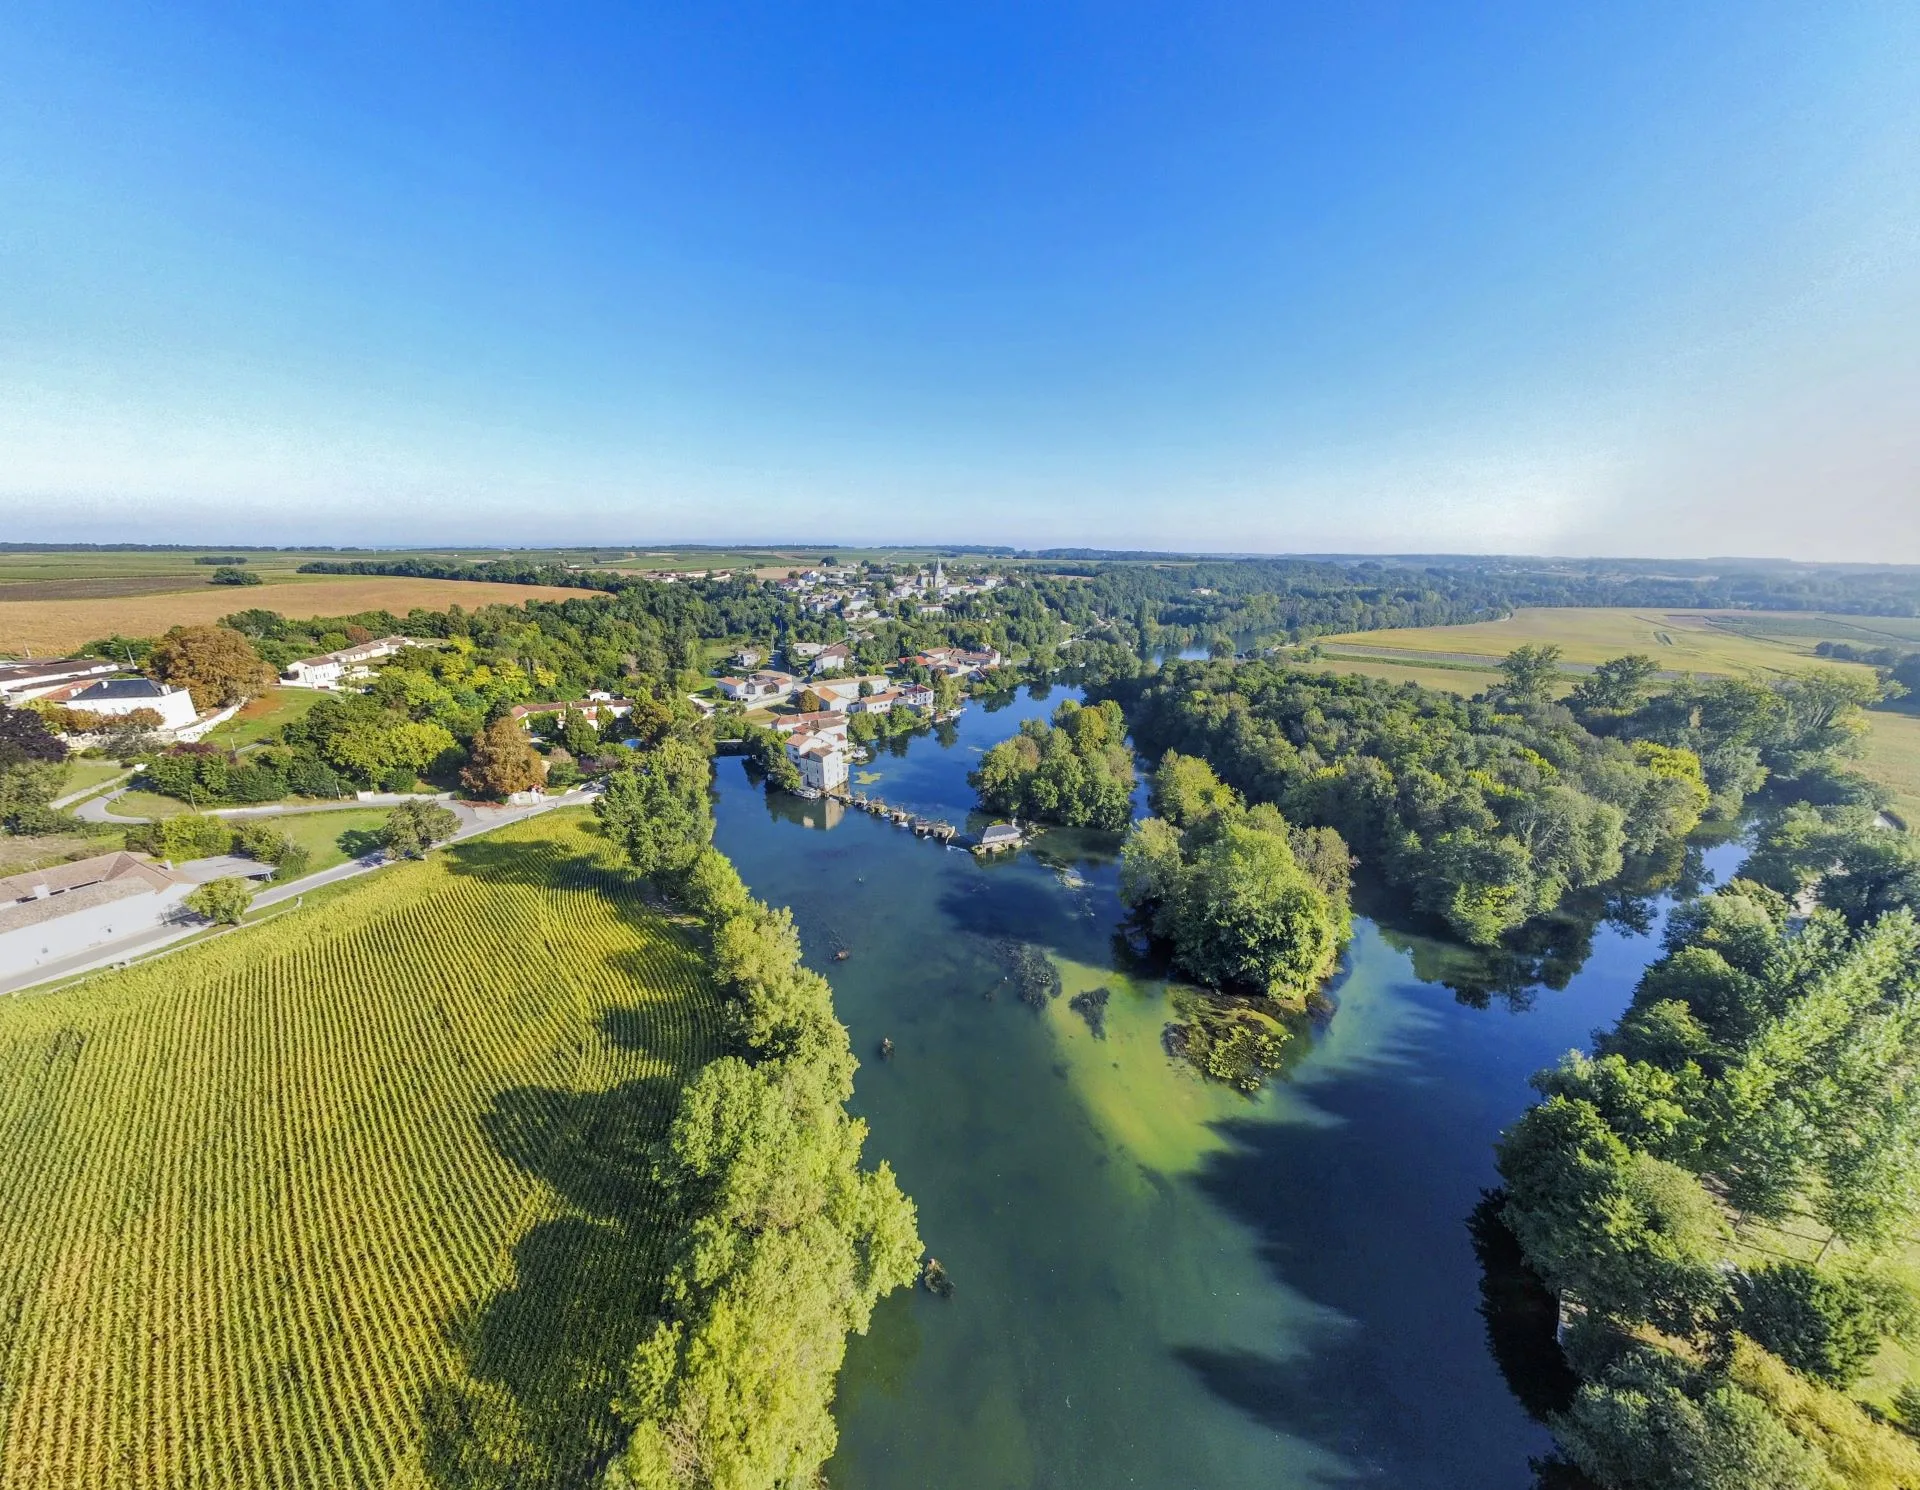 aerial view of the fisheries, eel fishing ponds and the village of Saint Simeux on the banks of the River Charente